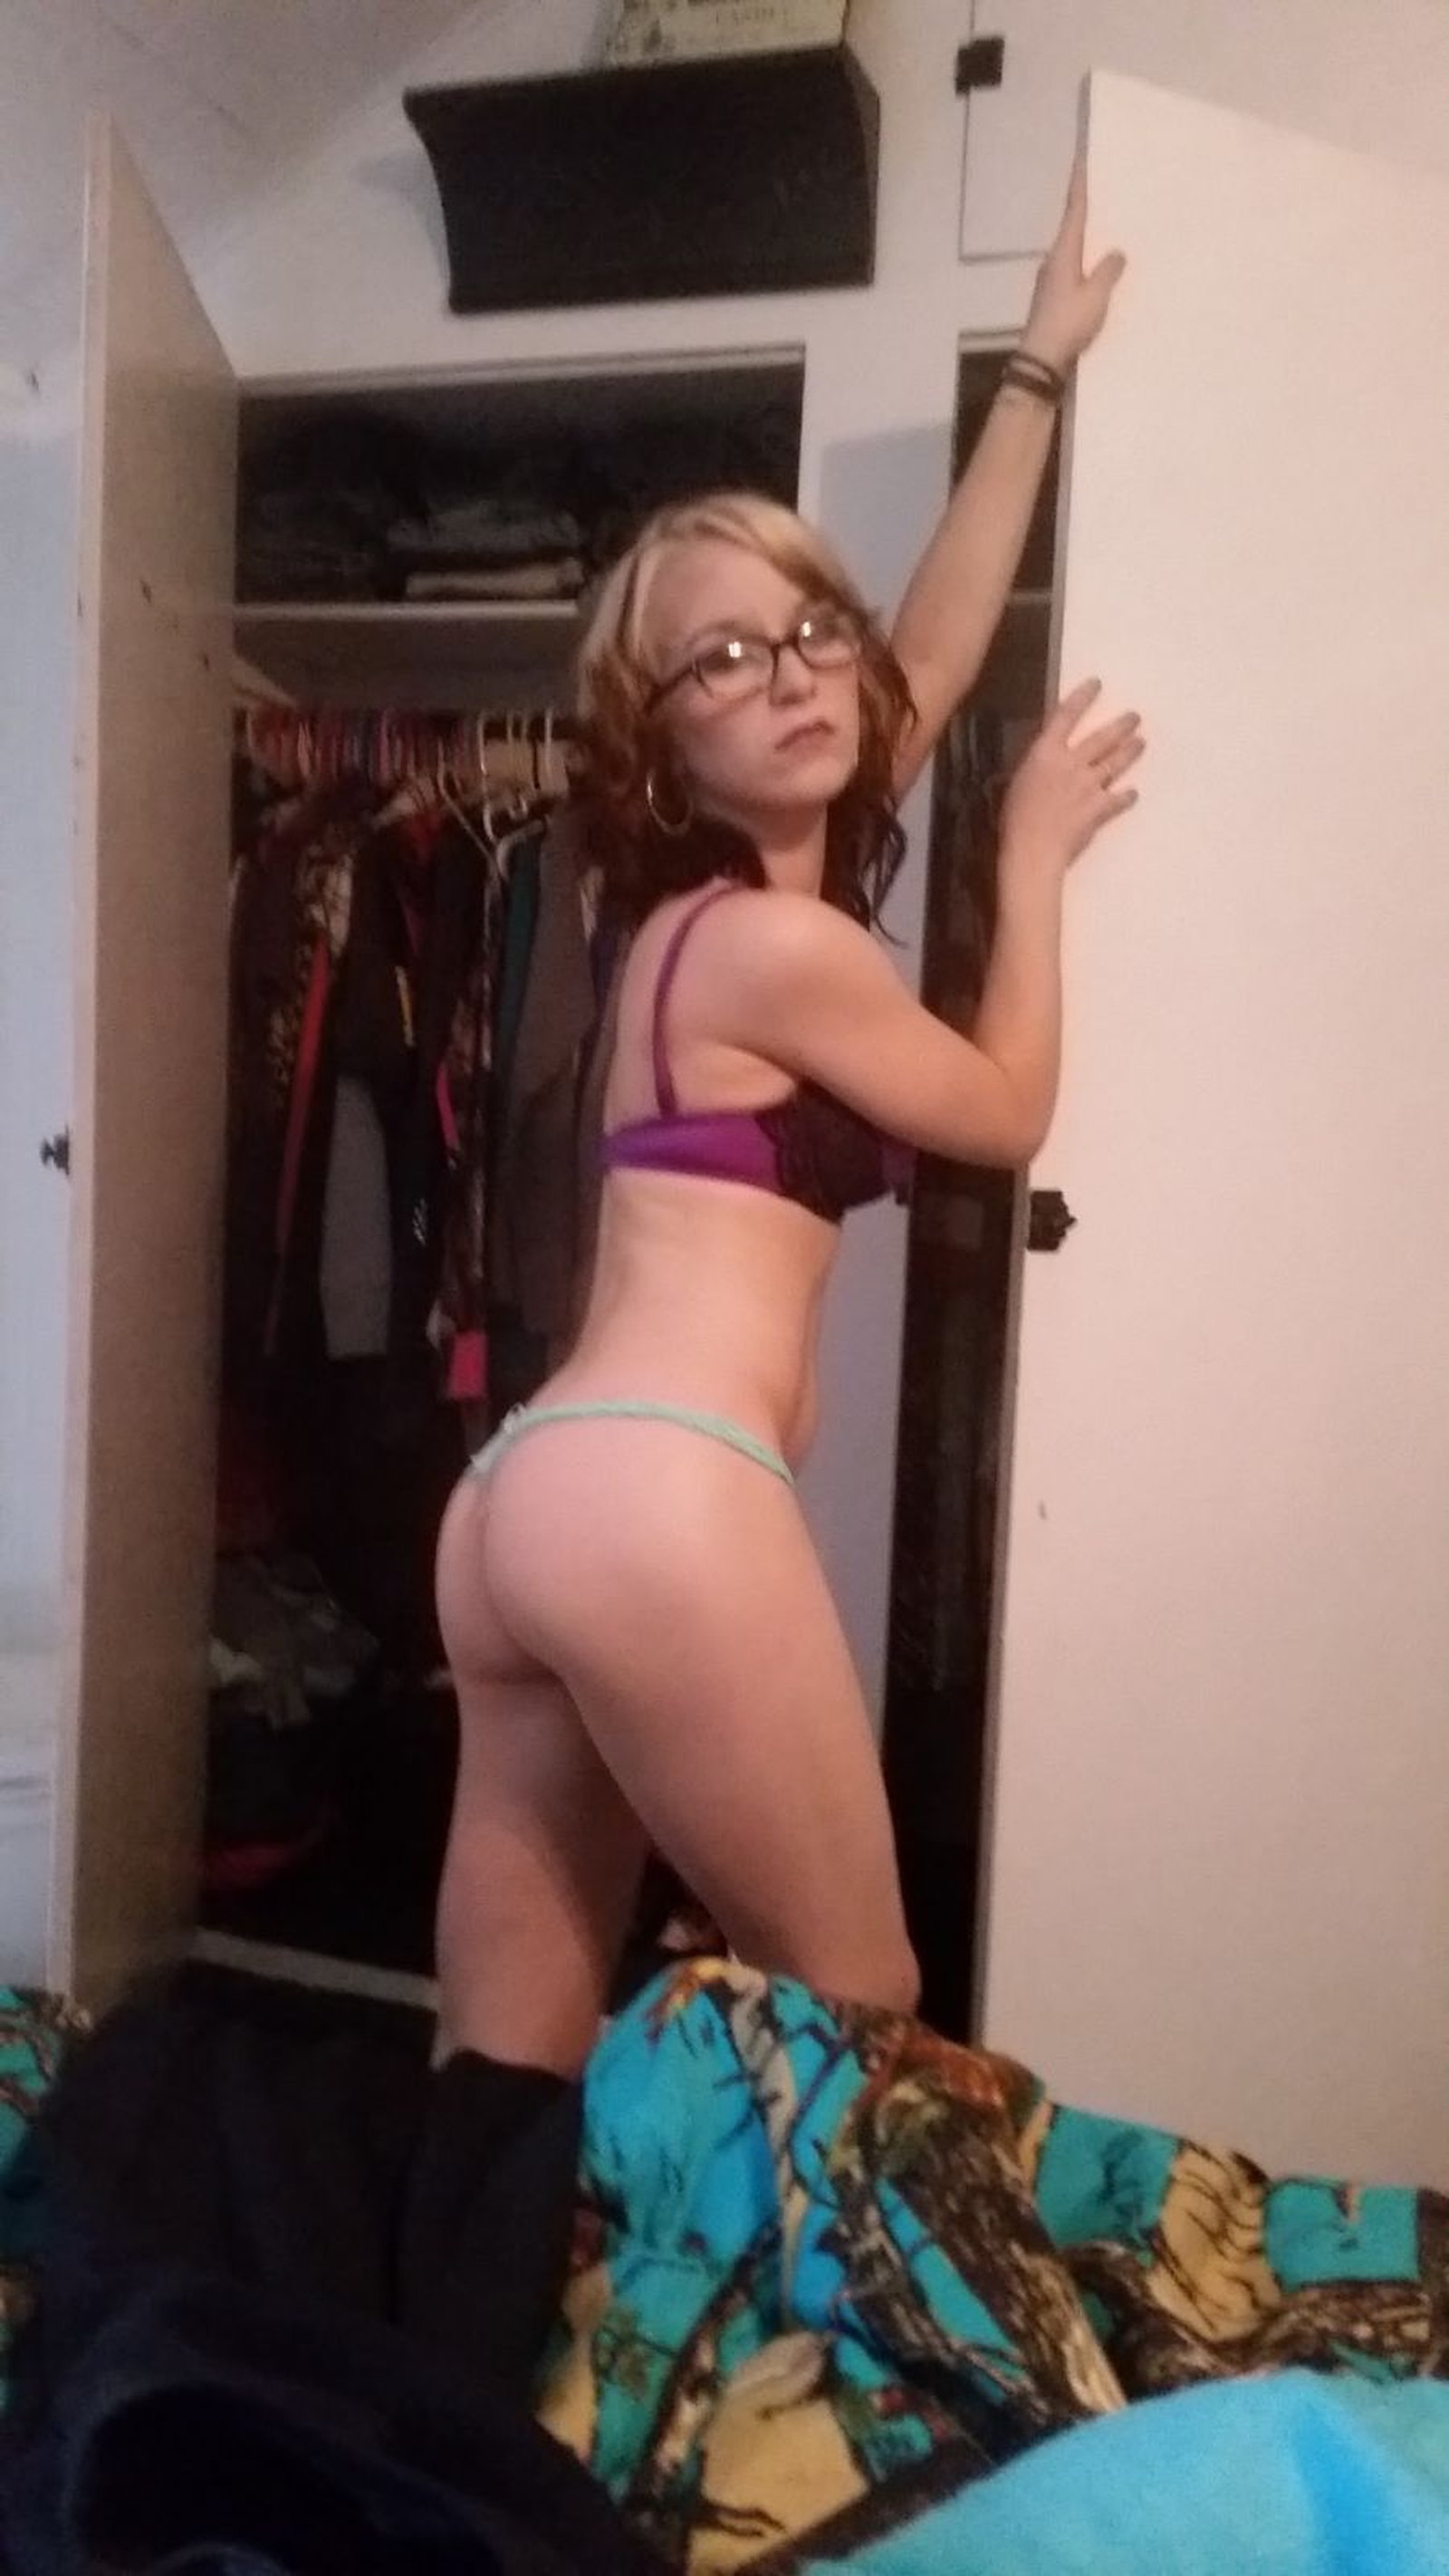 Watch the Photo by Brucey55 with the username @Brucey55, posted on August 13, 2020. The post is about the topic Exposed Wife. and the text says '#slut #whore #petite #nude'